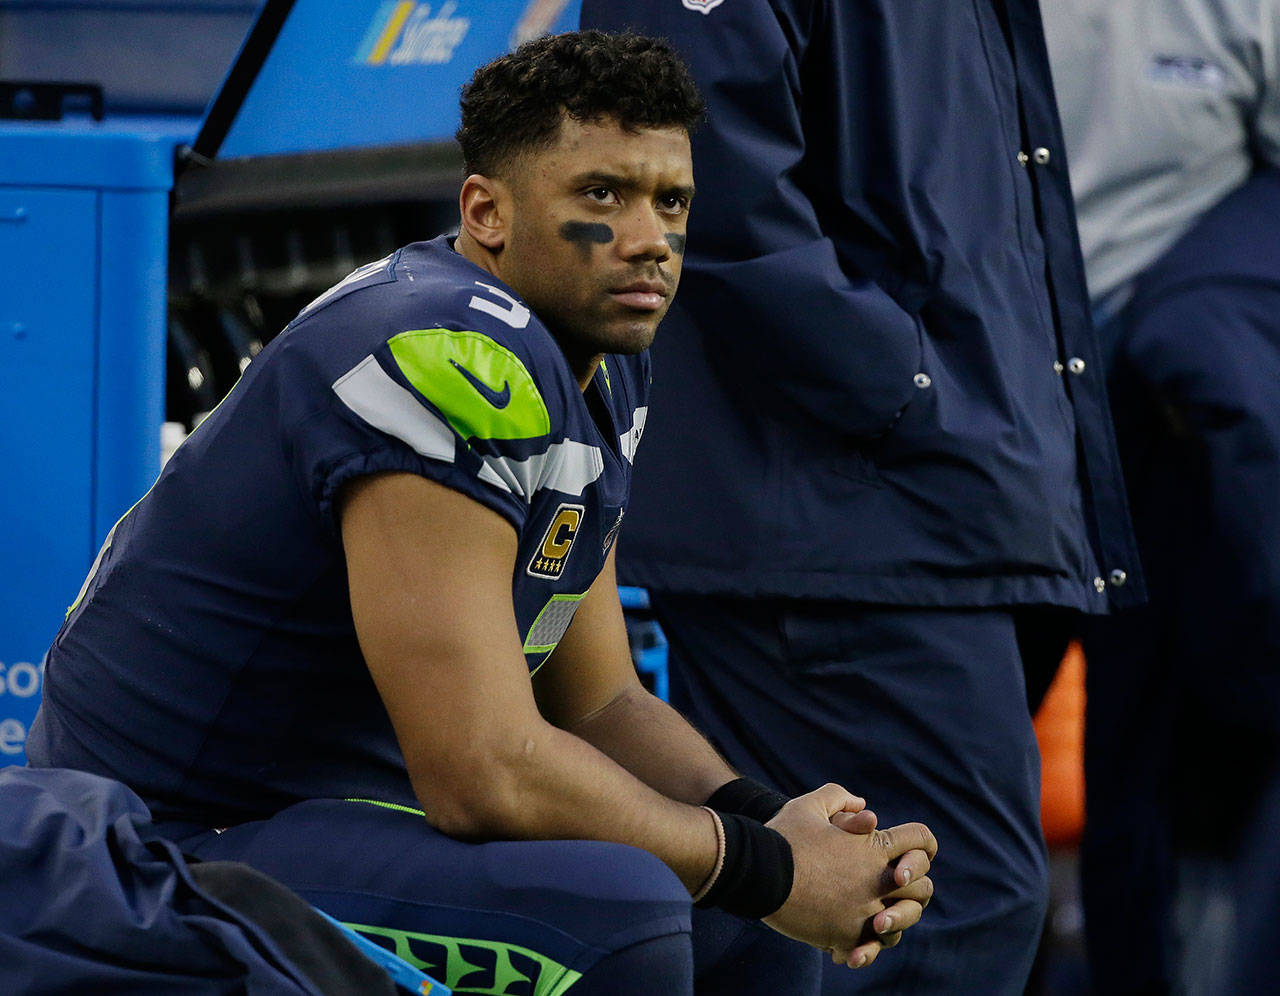 Seahawks quarterback Russell Wilson sits on the bench late in the second half of a game against the Rams on Dec. 17, 2017, in Seattle. (AP Photo/Elaine Thompson)